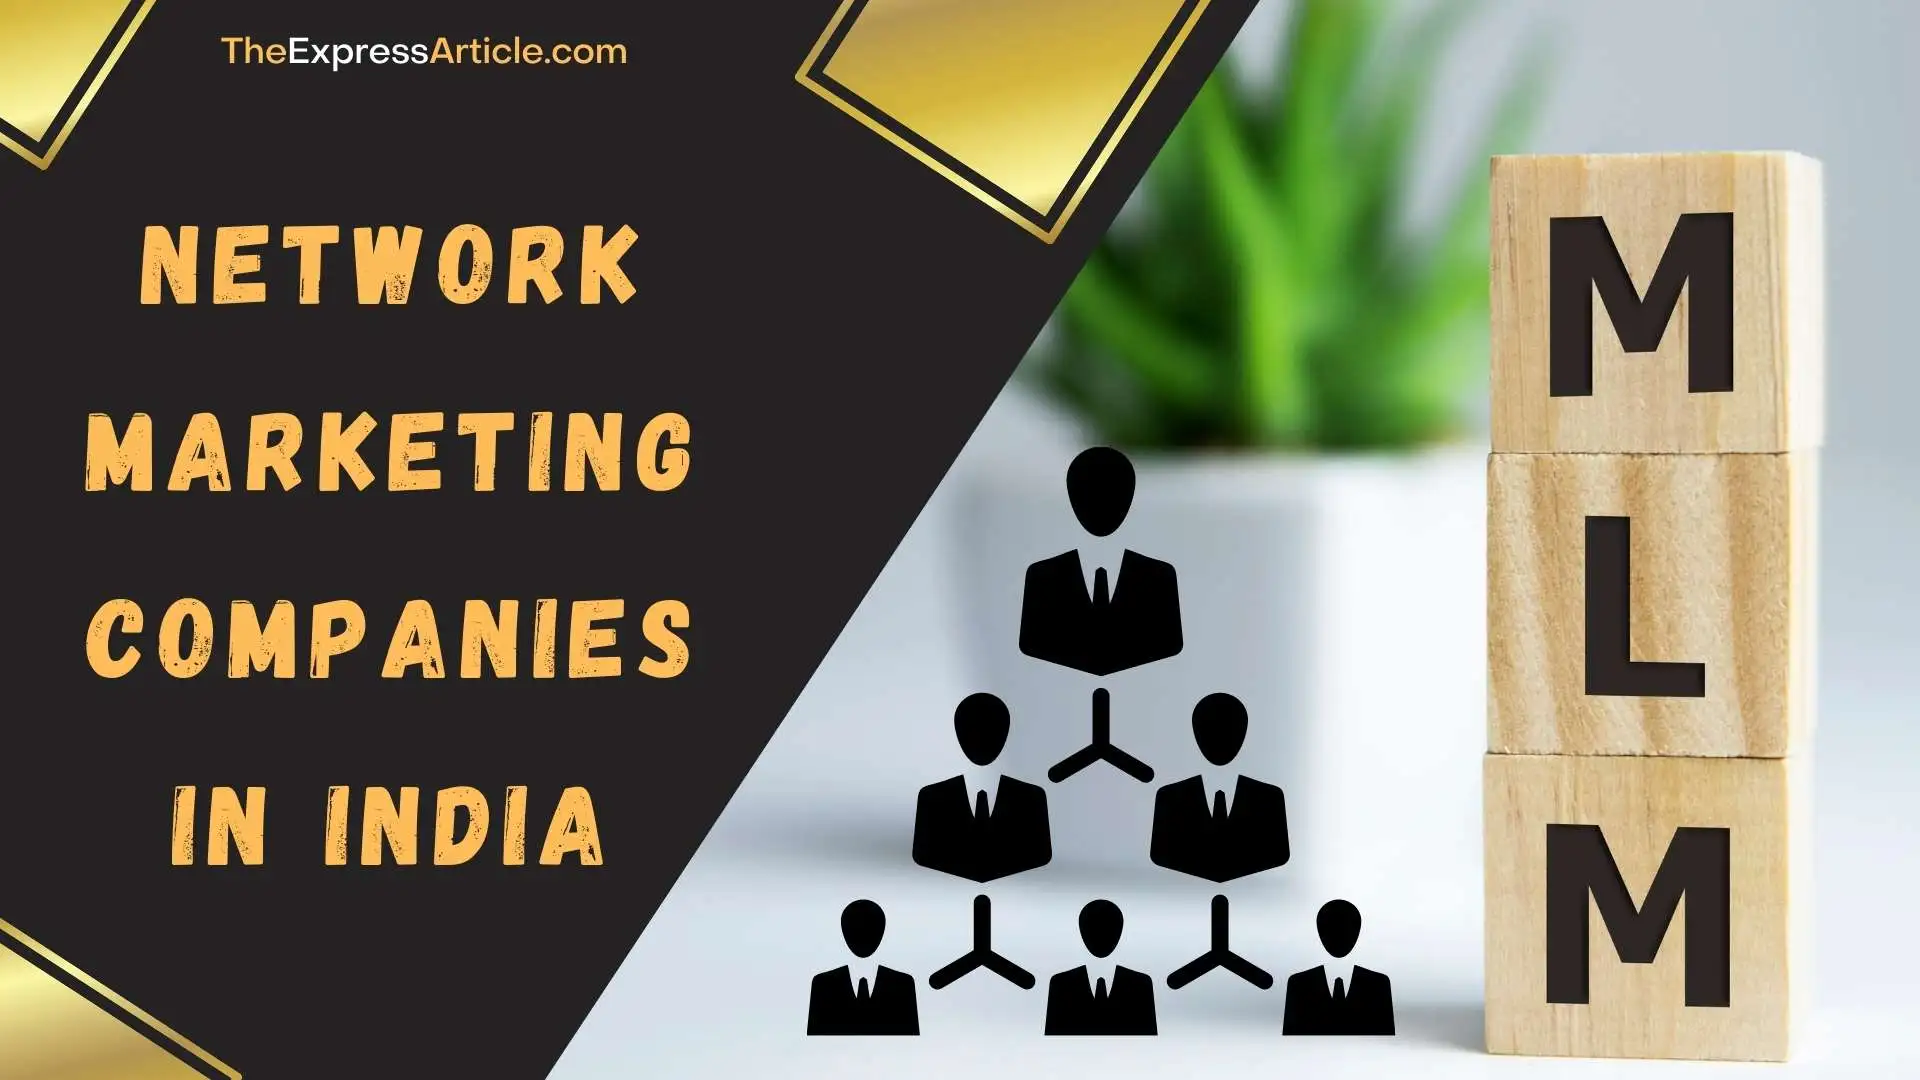 Trusted Network Marketing Companies In India